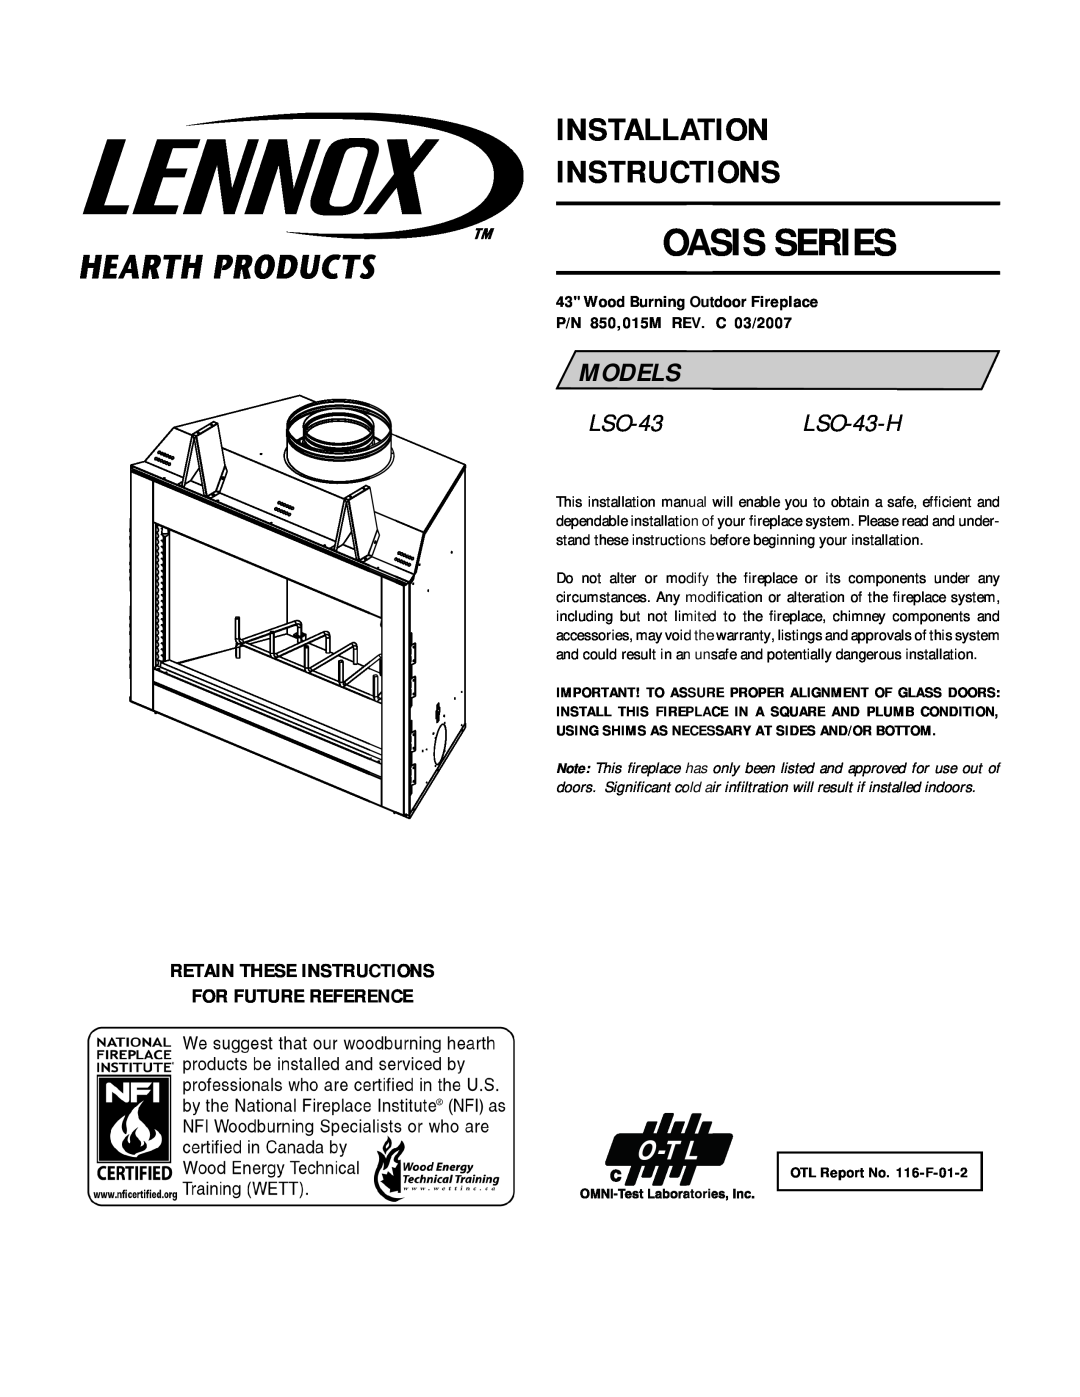 Lennox Hearth LSO-43 installation instructions Retain These Instructions For Future Reference, OTL Report No. 116-F-01-2 